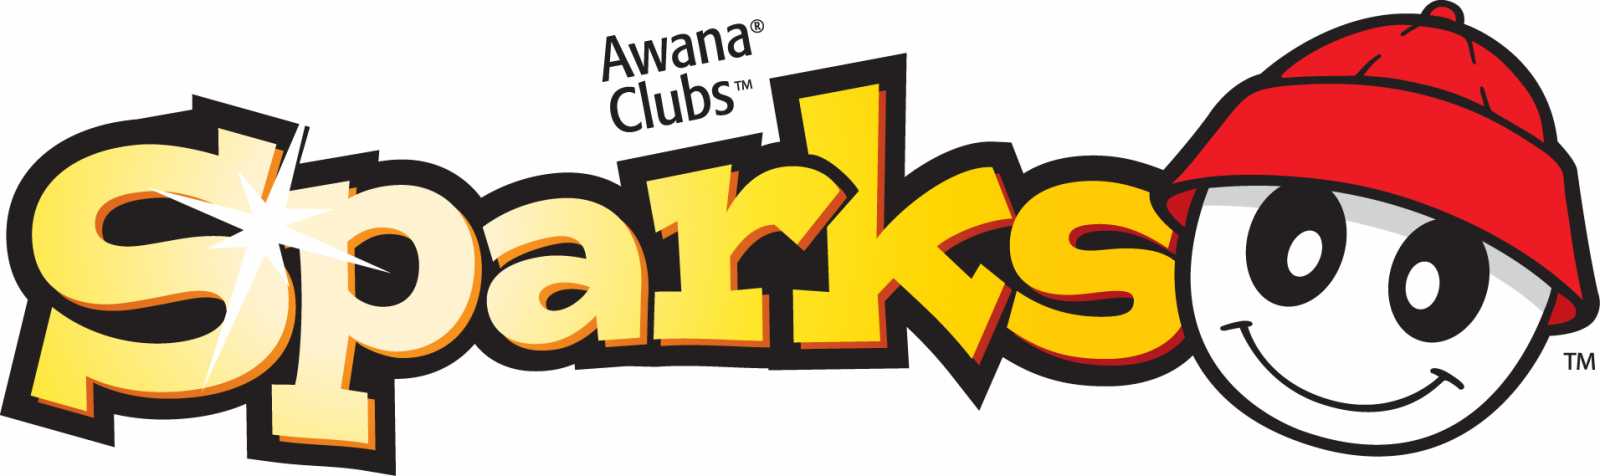 Free cliparts download clip. Awana clipart sparks